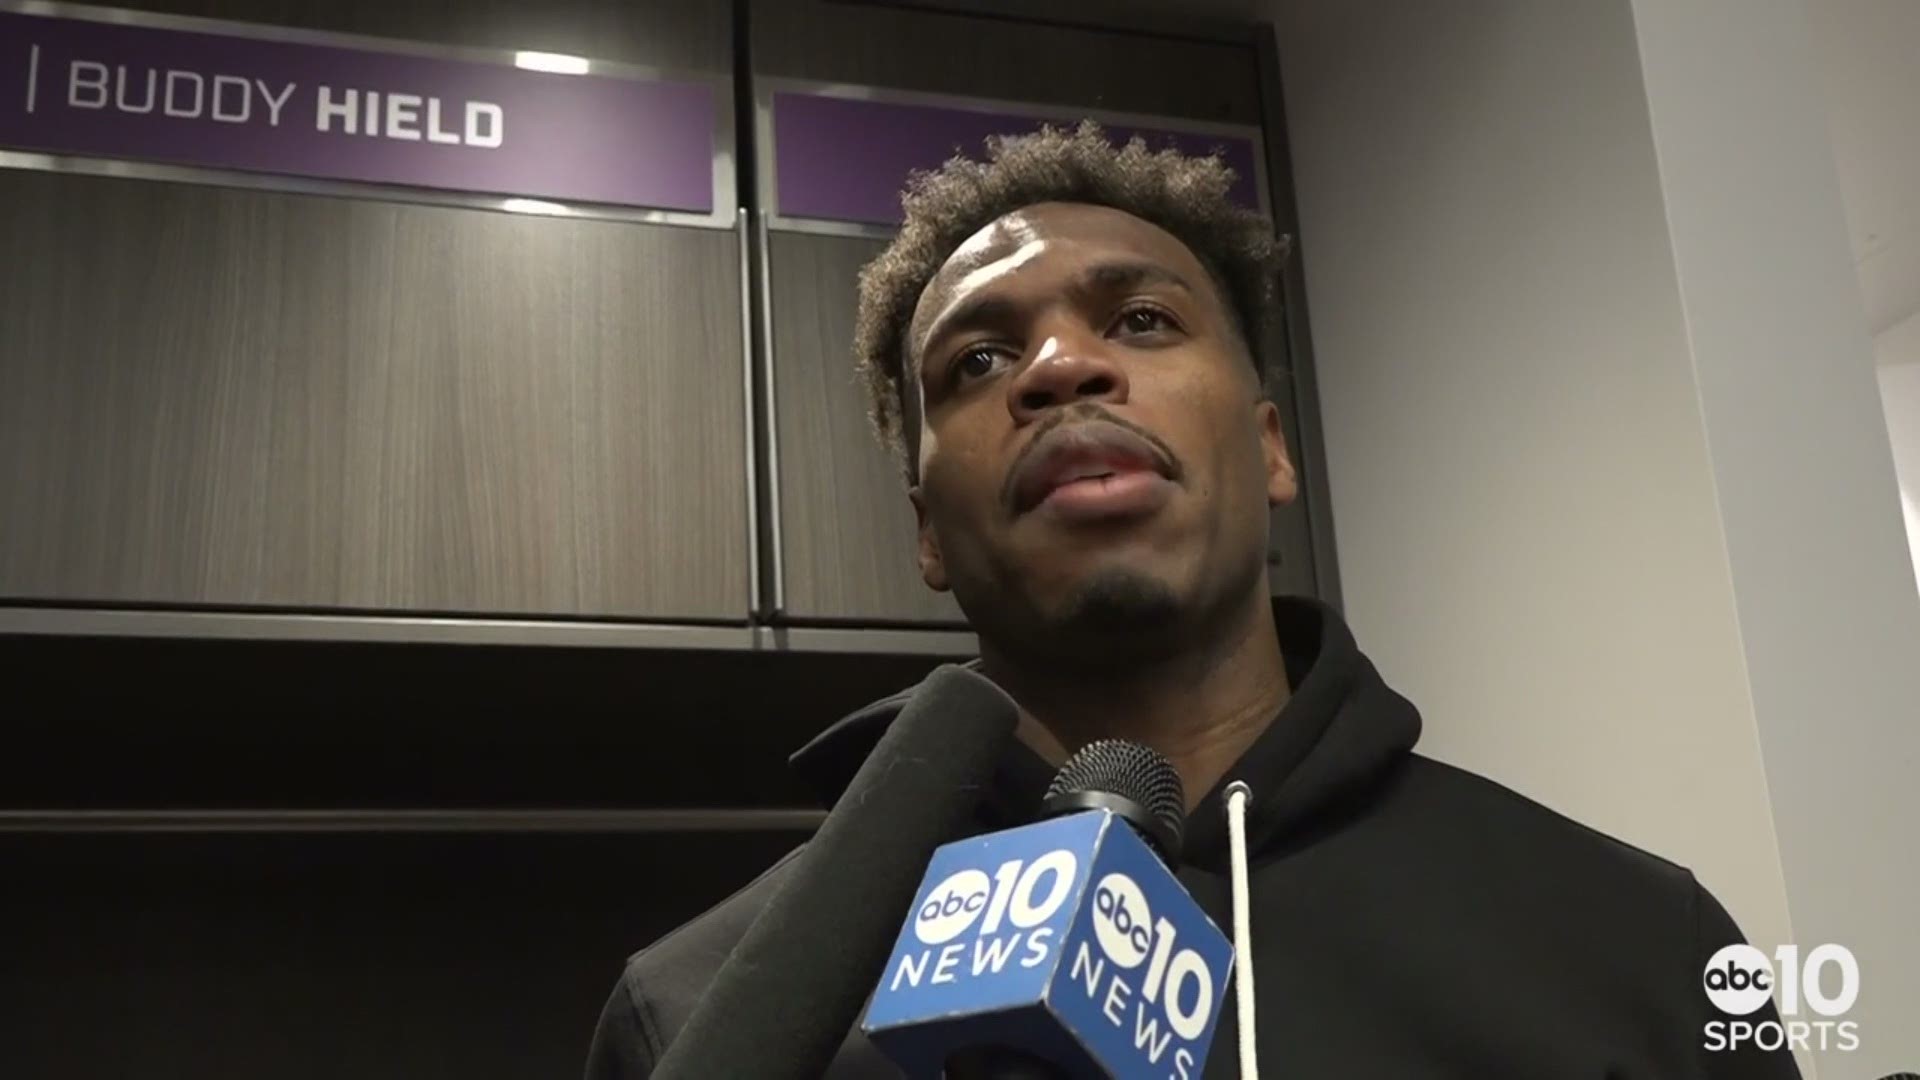 Sacramento Kings guard Buddy Hield leads the Kings in scoring with 23 points in their 94-93 in over the Oklahoma City Thunder, for their third straight victory.